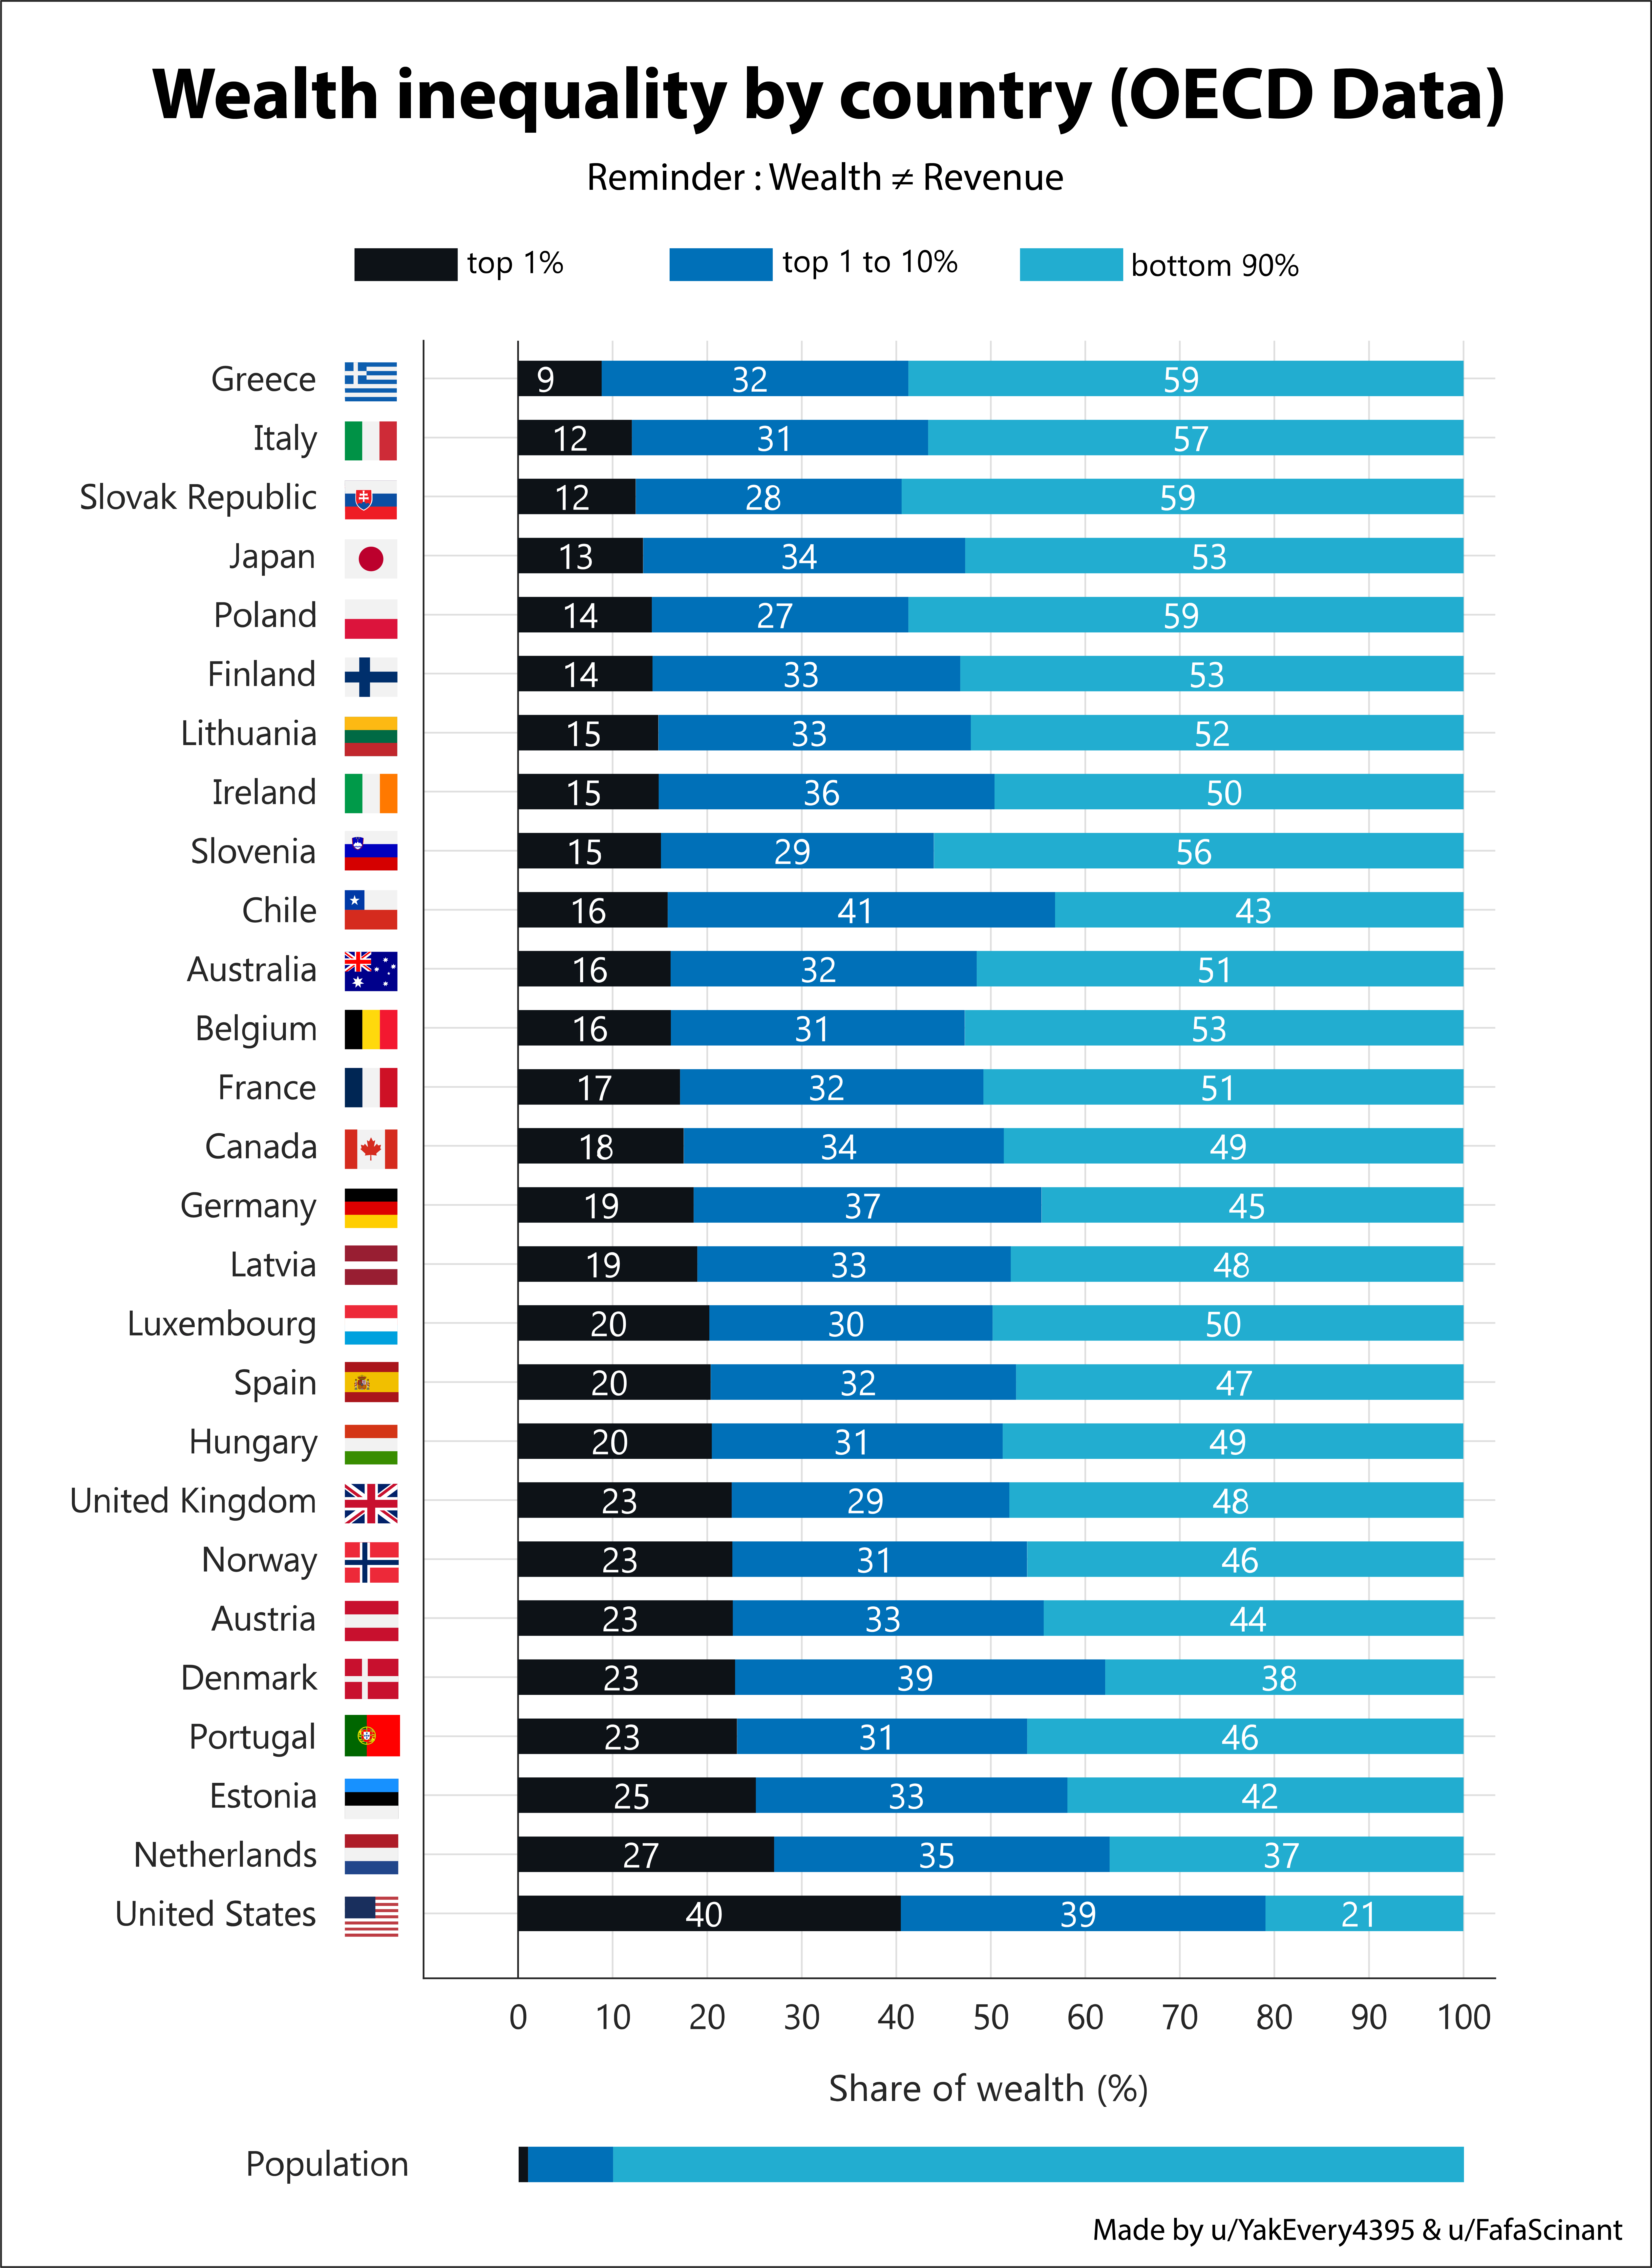 wealth-inequality-by-country-oecd-data-v0-6lutkla5vbdb1.png